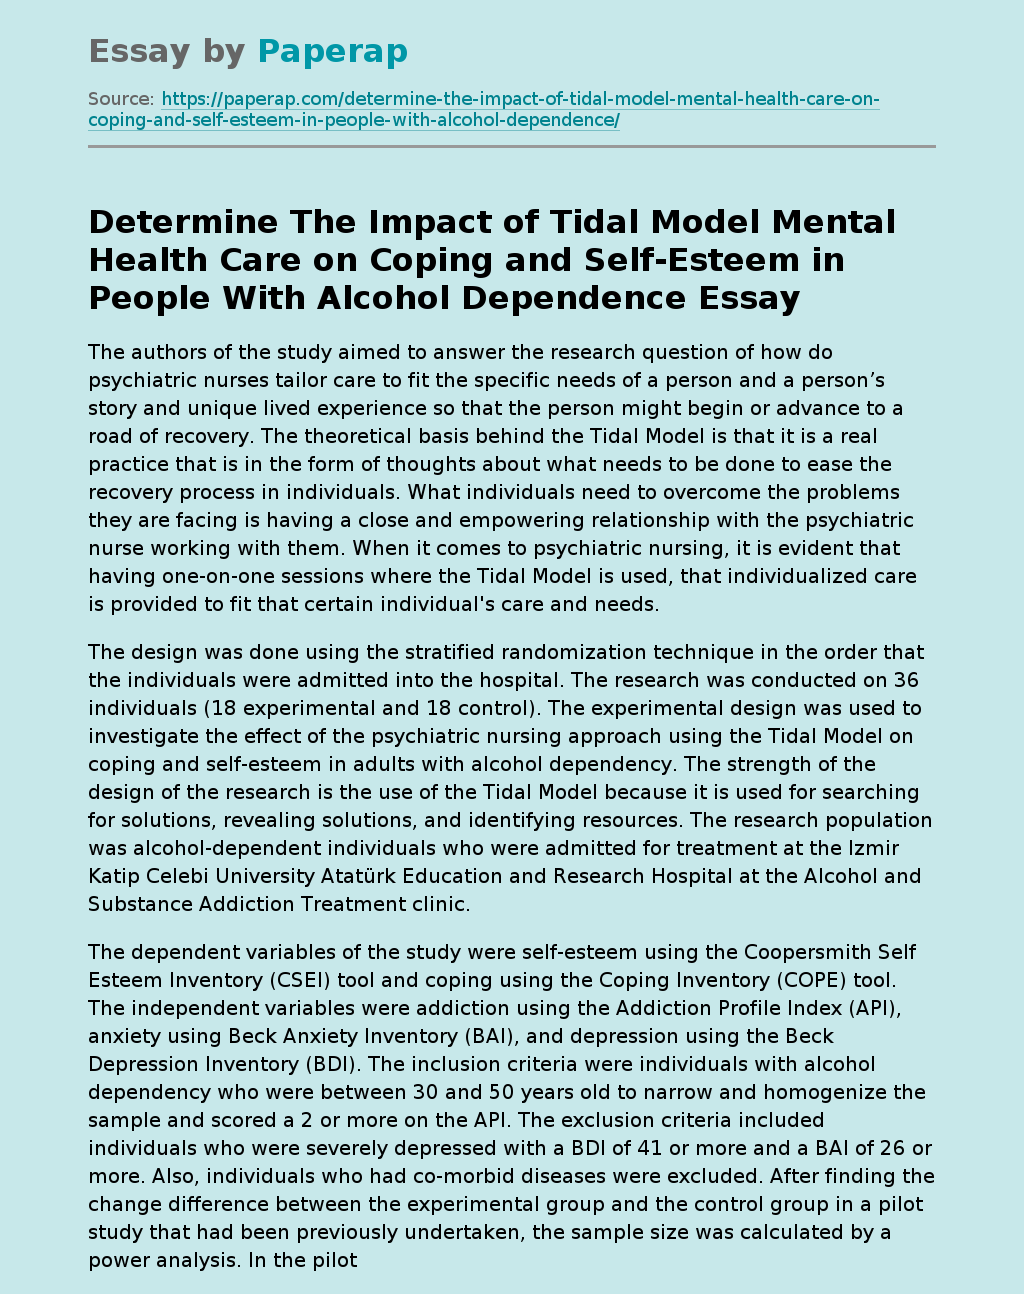 Determine The Impact of Tidal Model Mental Health Care on Coping and Self-Esteem in People With Alcohol Dependence